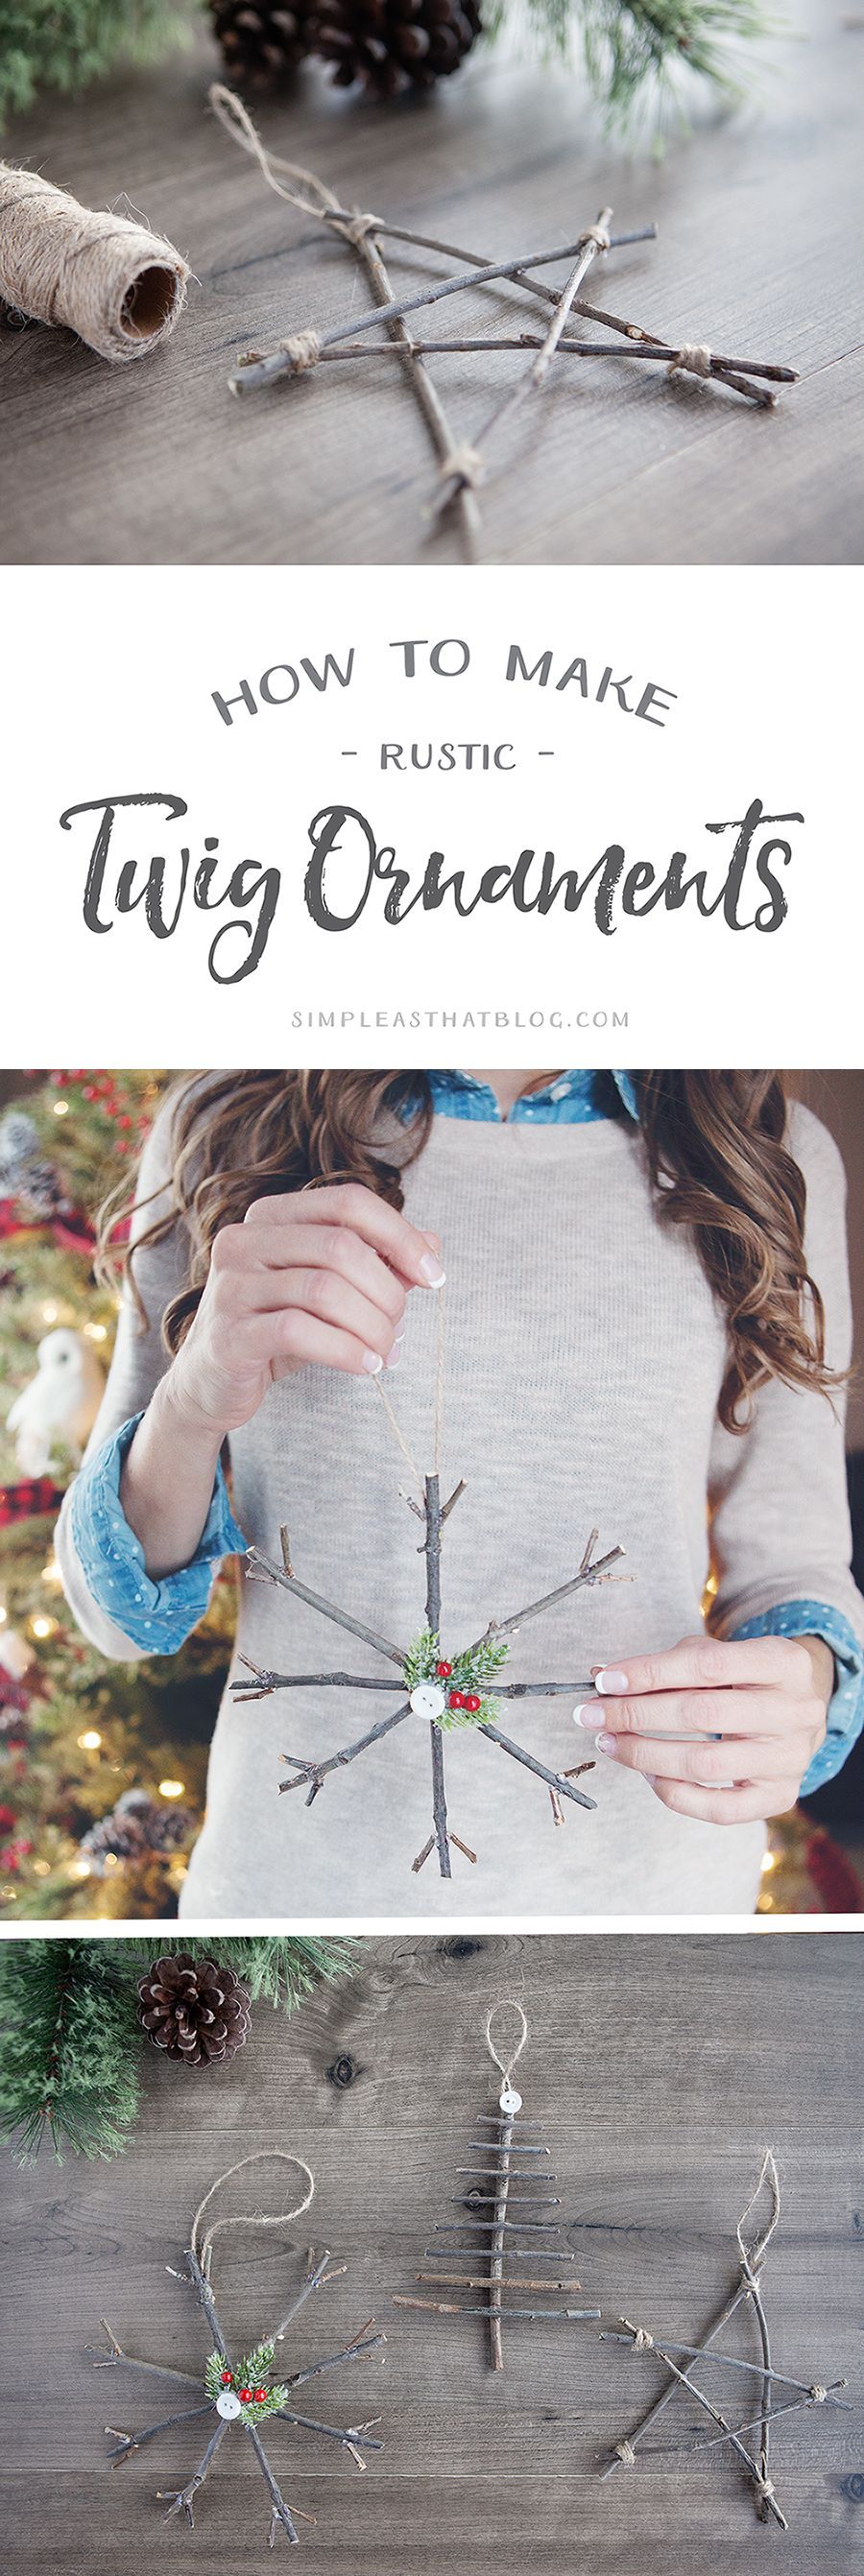 Bring a touch of nature indoors this year as you decorate your tree – learn how to make rustic twig Christmas ornaments! They’re